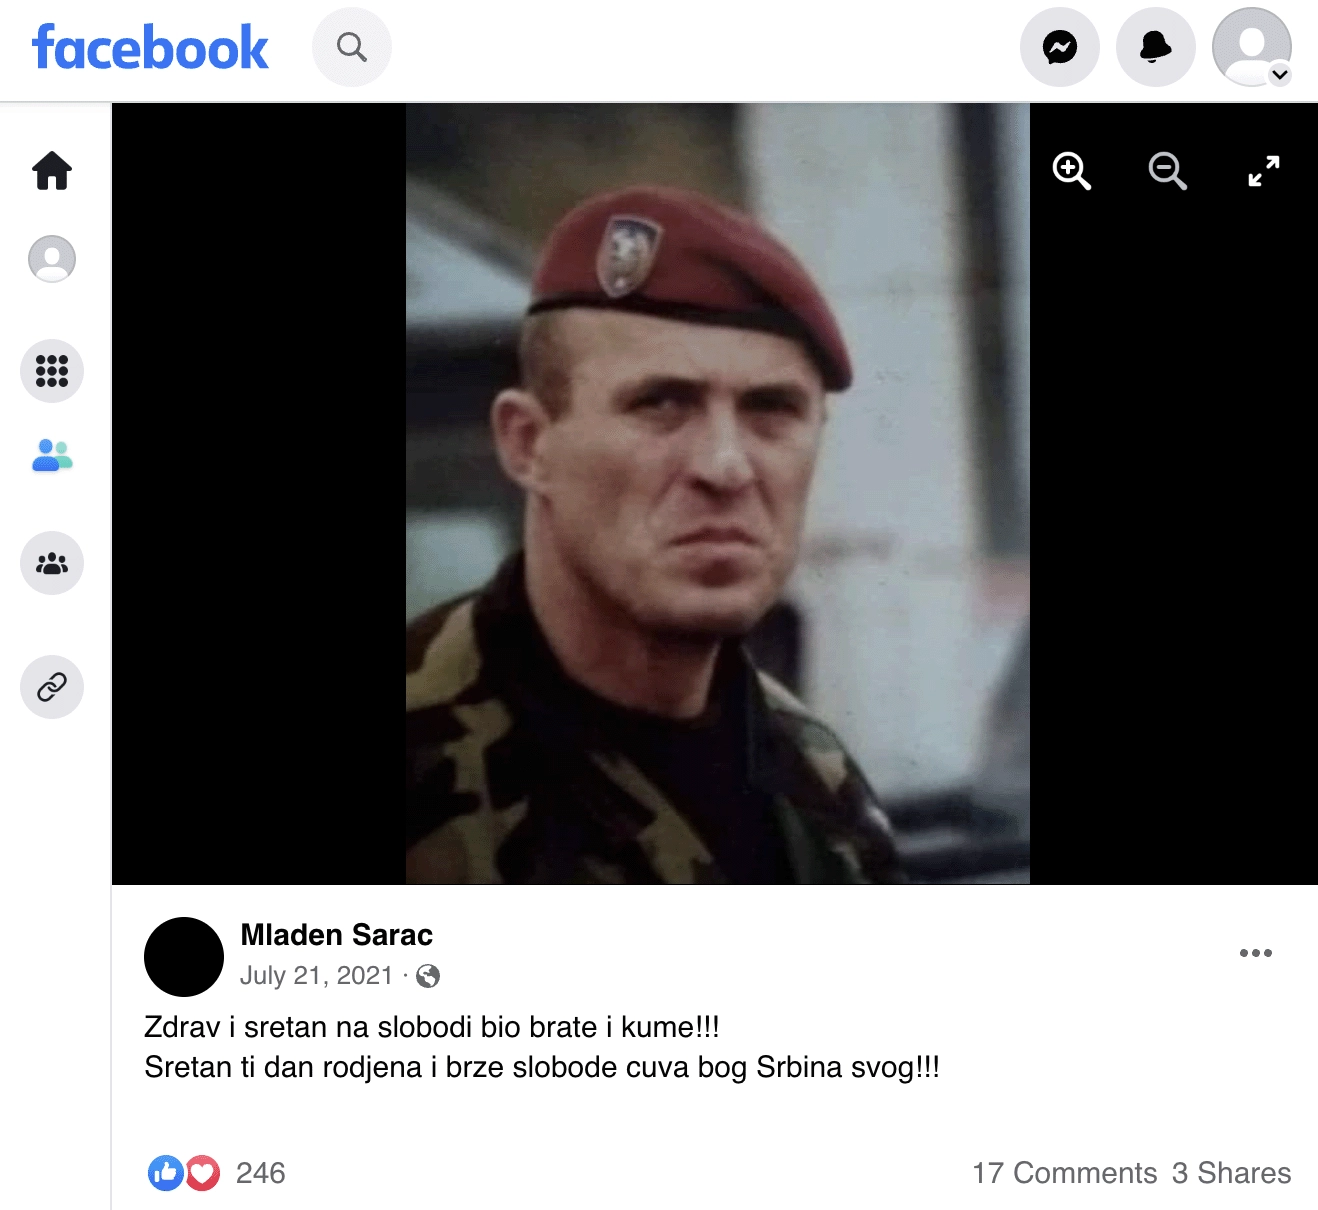 A Facebook post by Mladen Sarać in 2021 wishes “speedy freedom” (in Serbian) for Zvezdan Jovanović, who is serving a 40-year sentence for killing Serbian Prime Minister Zoran Đinđić.